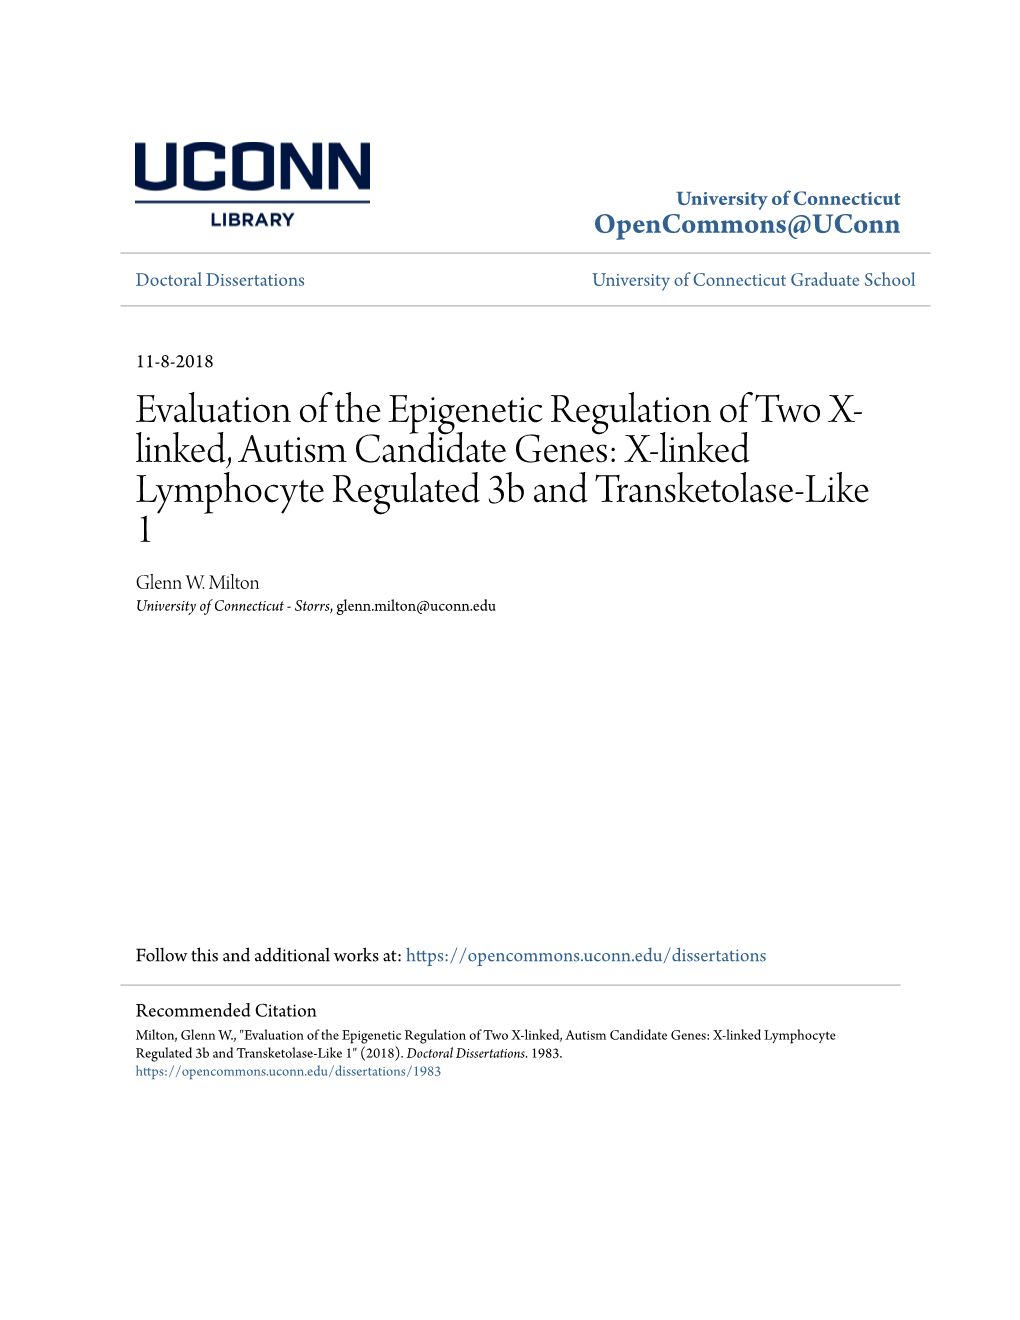 Evaluation of the Epigenetic Regulation of Two X-Linked, Autism Candidate Genes: X-Linked Lymphocyte Regulated 3B and Transketolase-Like 1" (2018)